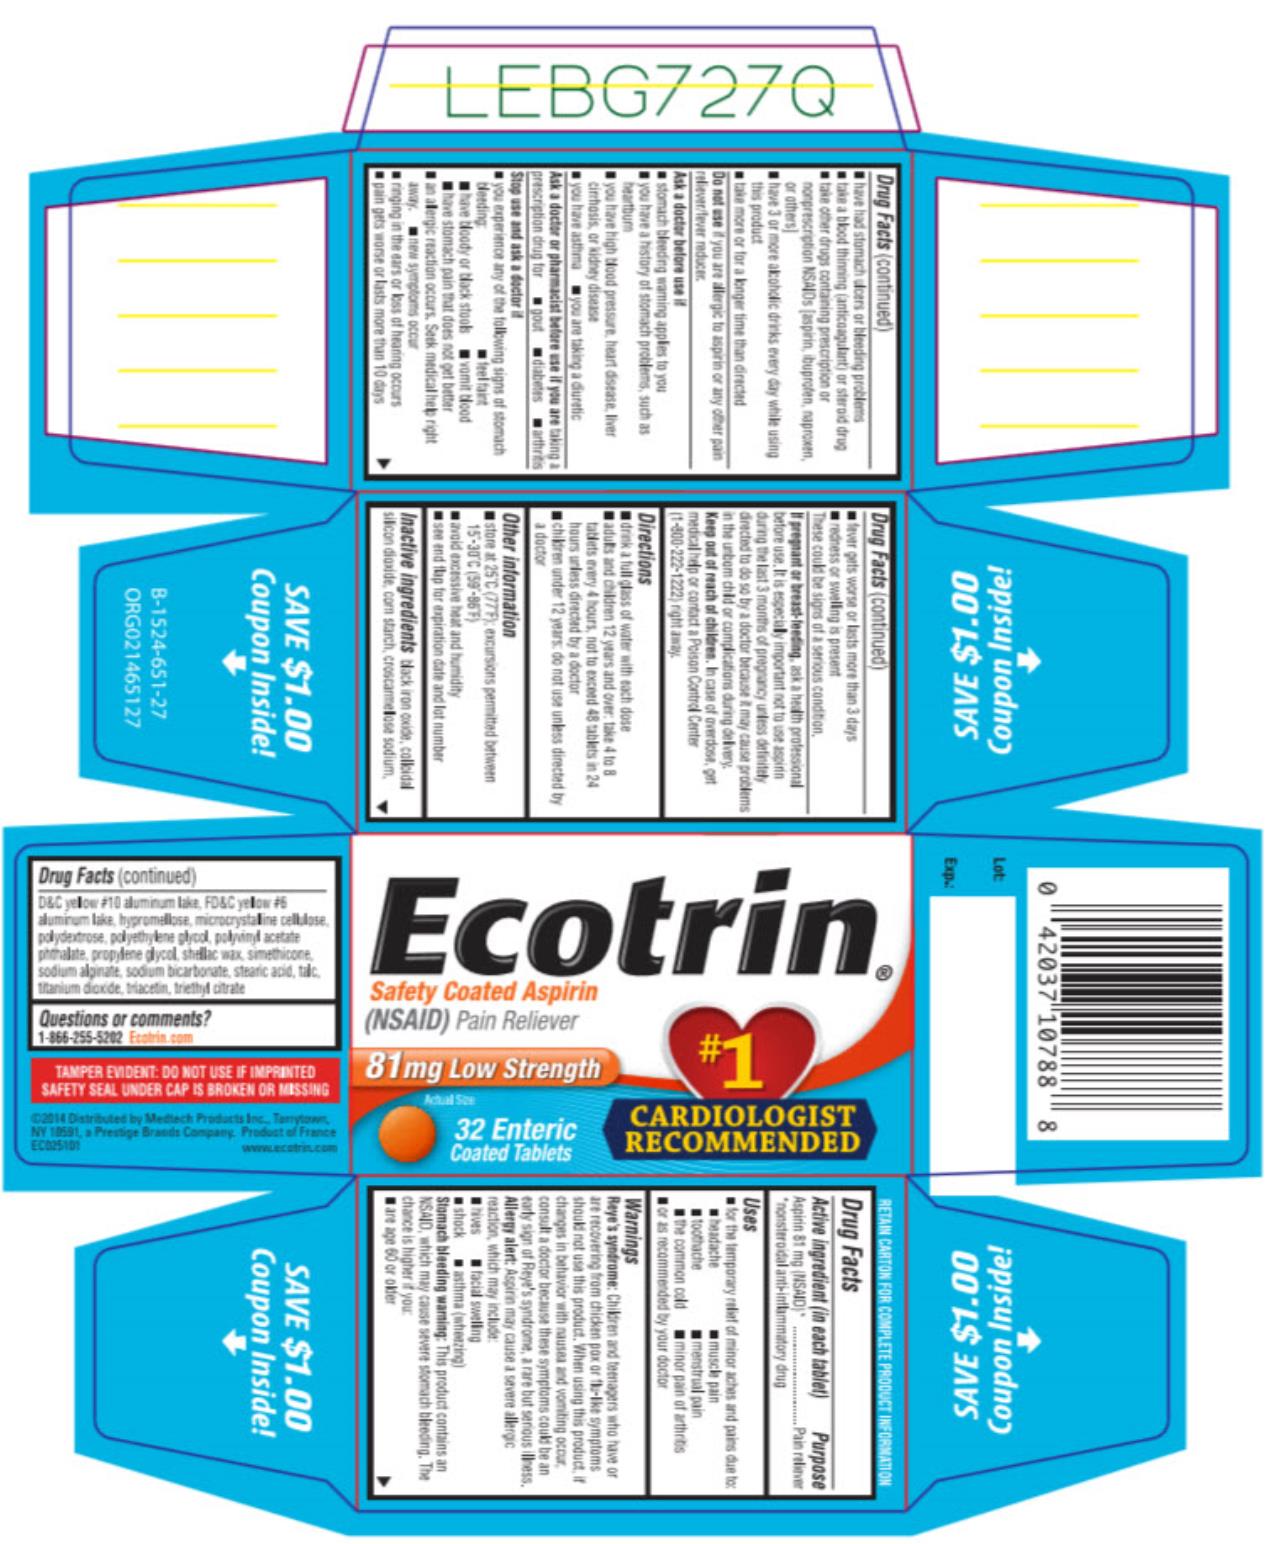 PRINCIPAL DISPLAY PANEL

Ecotrin®
Safety Coated Aspirin (NSAID) Pain Reliever
81 mg Low Strength 

32 Enteric Coated Tablets
